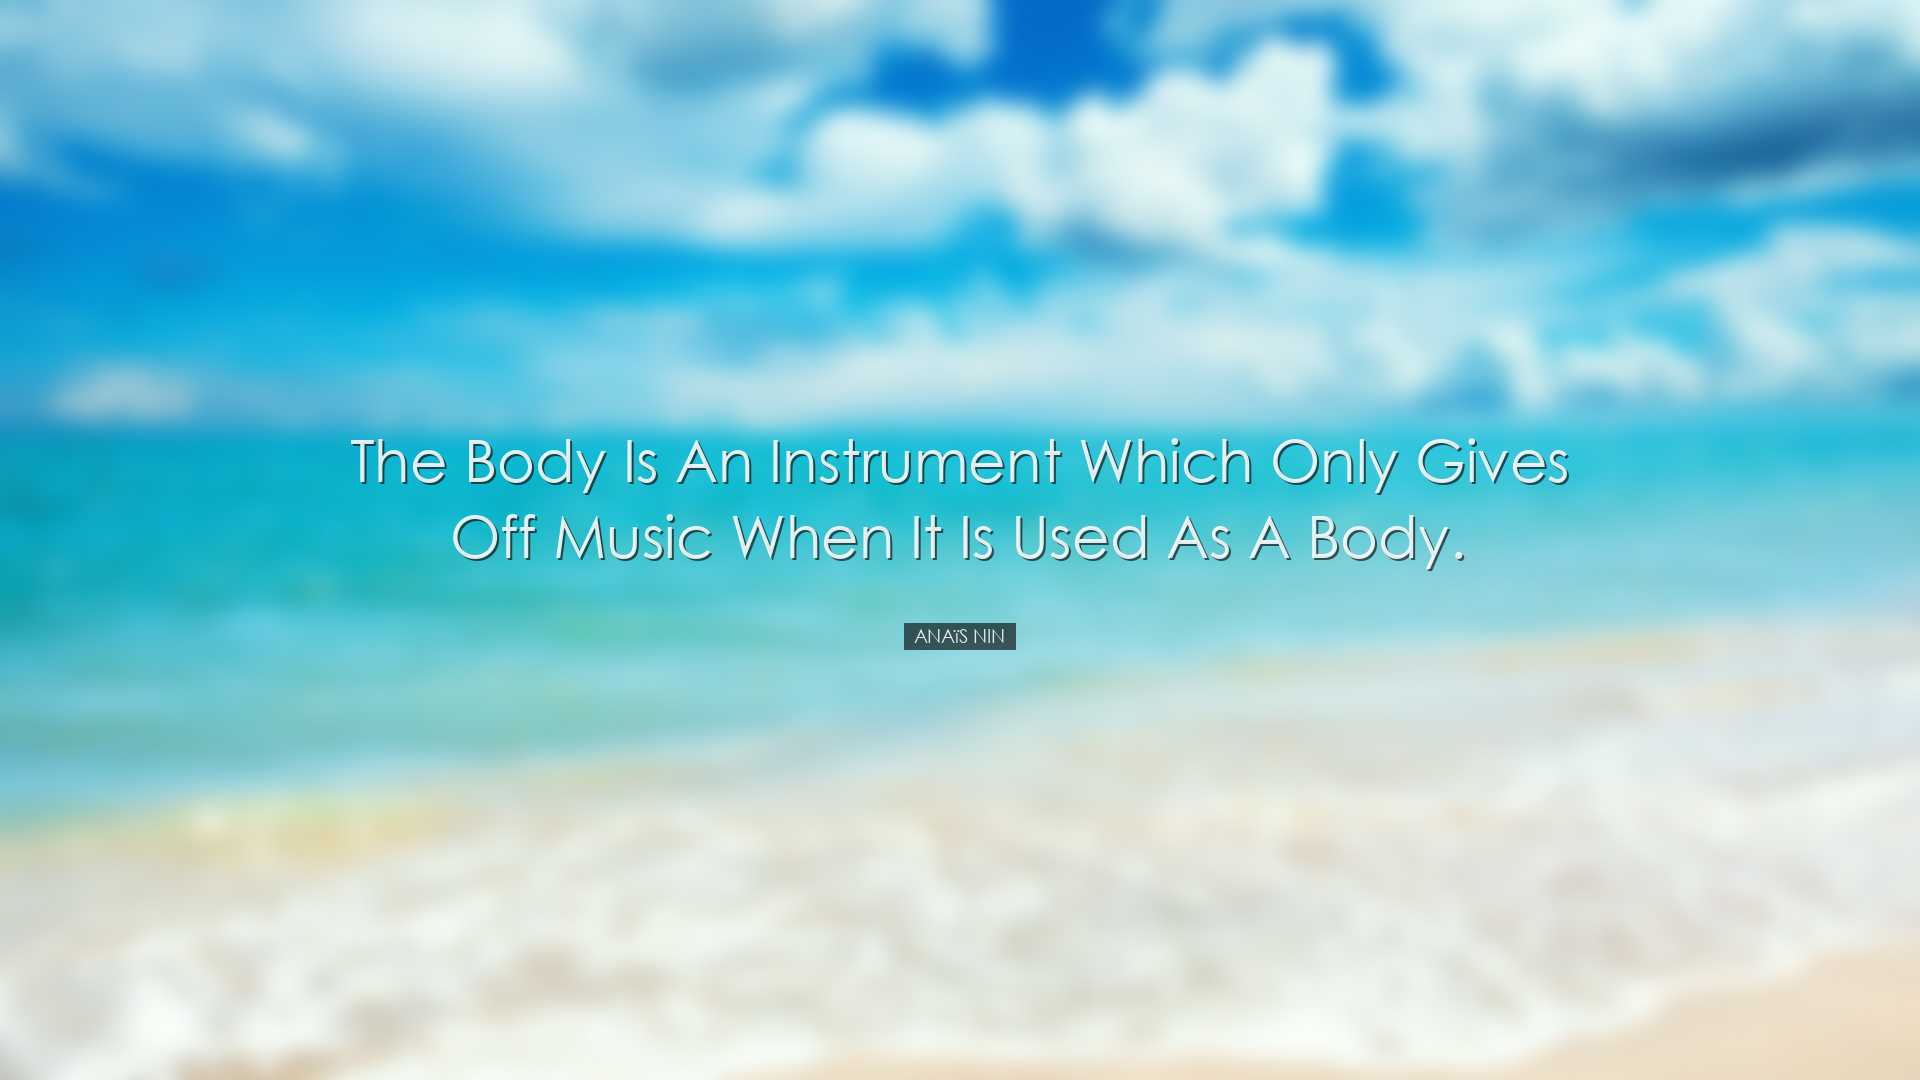 The body is an instrument which only gives off music when it is us